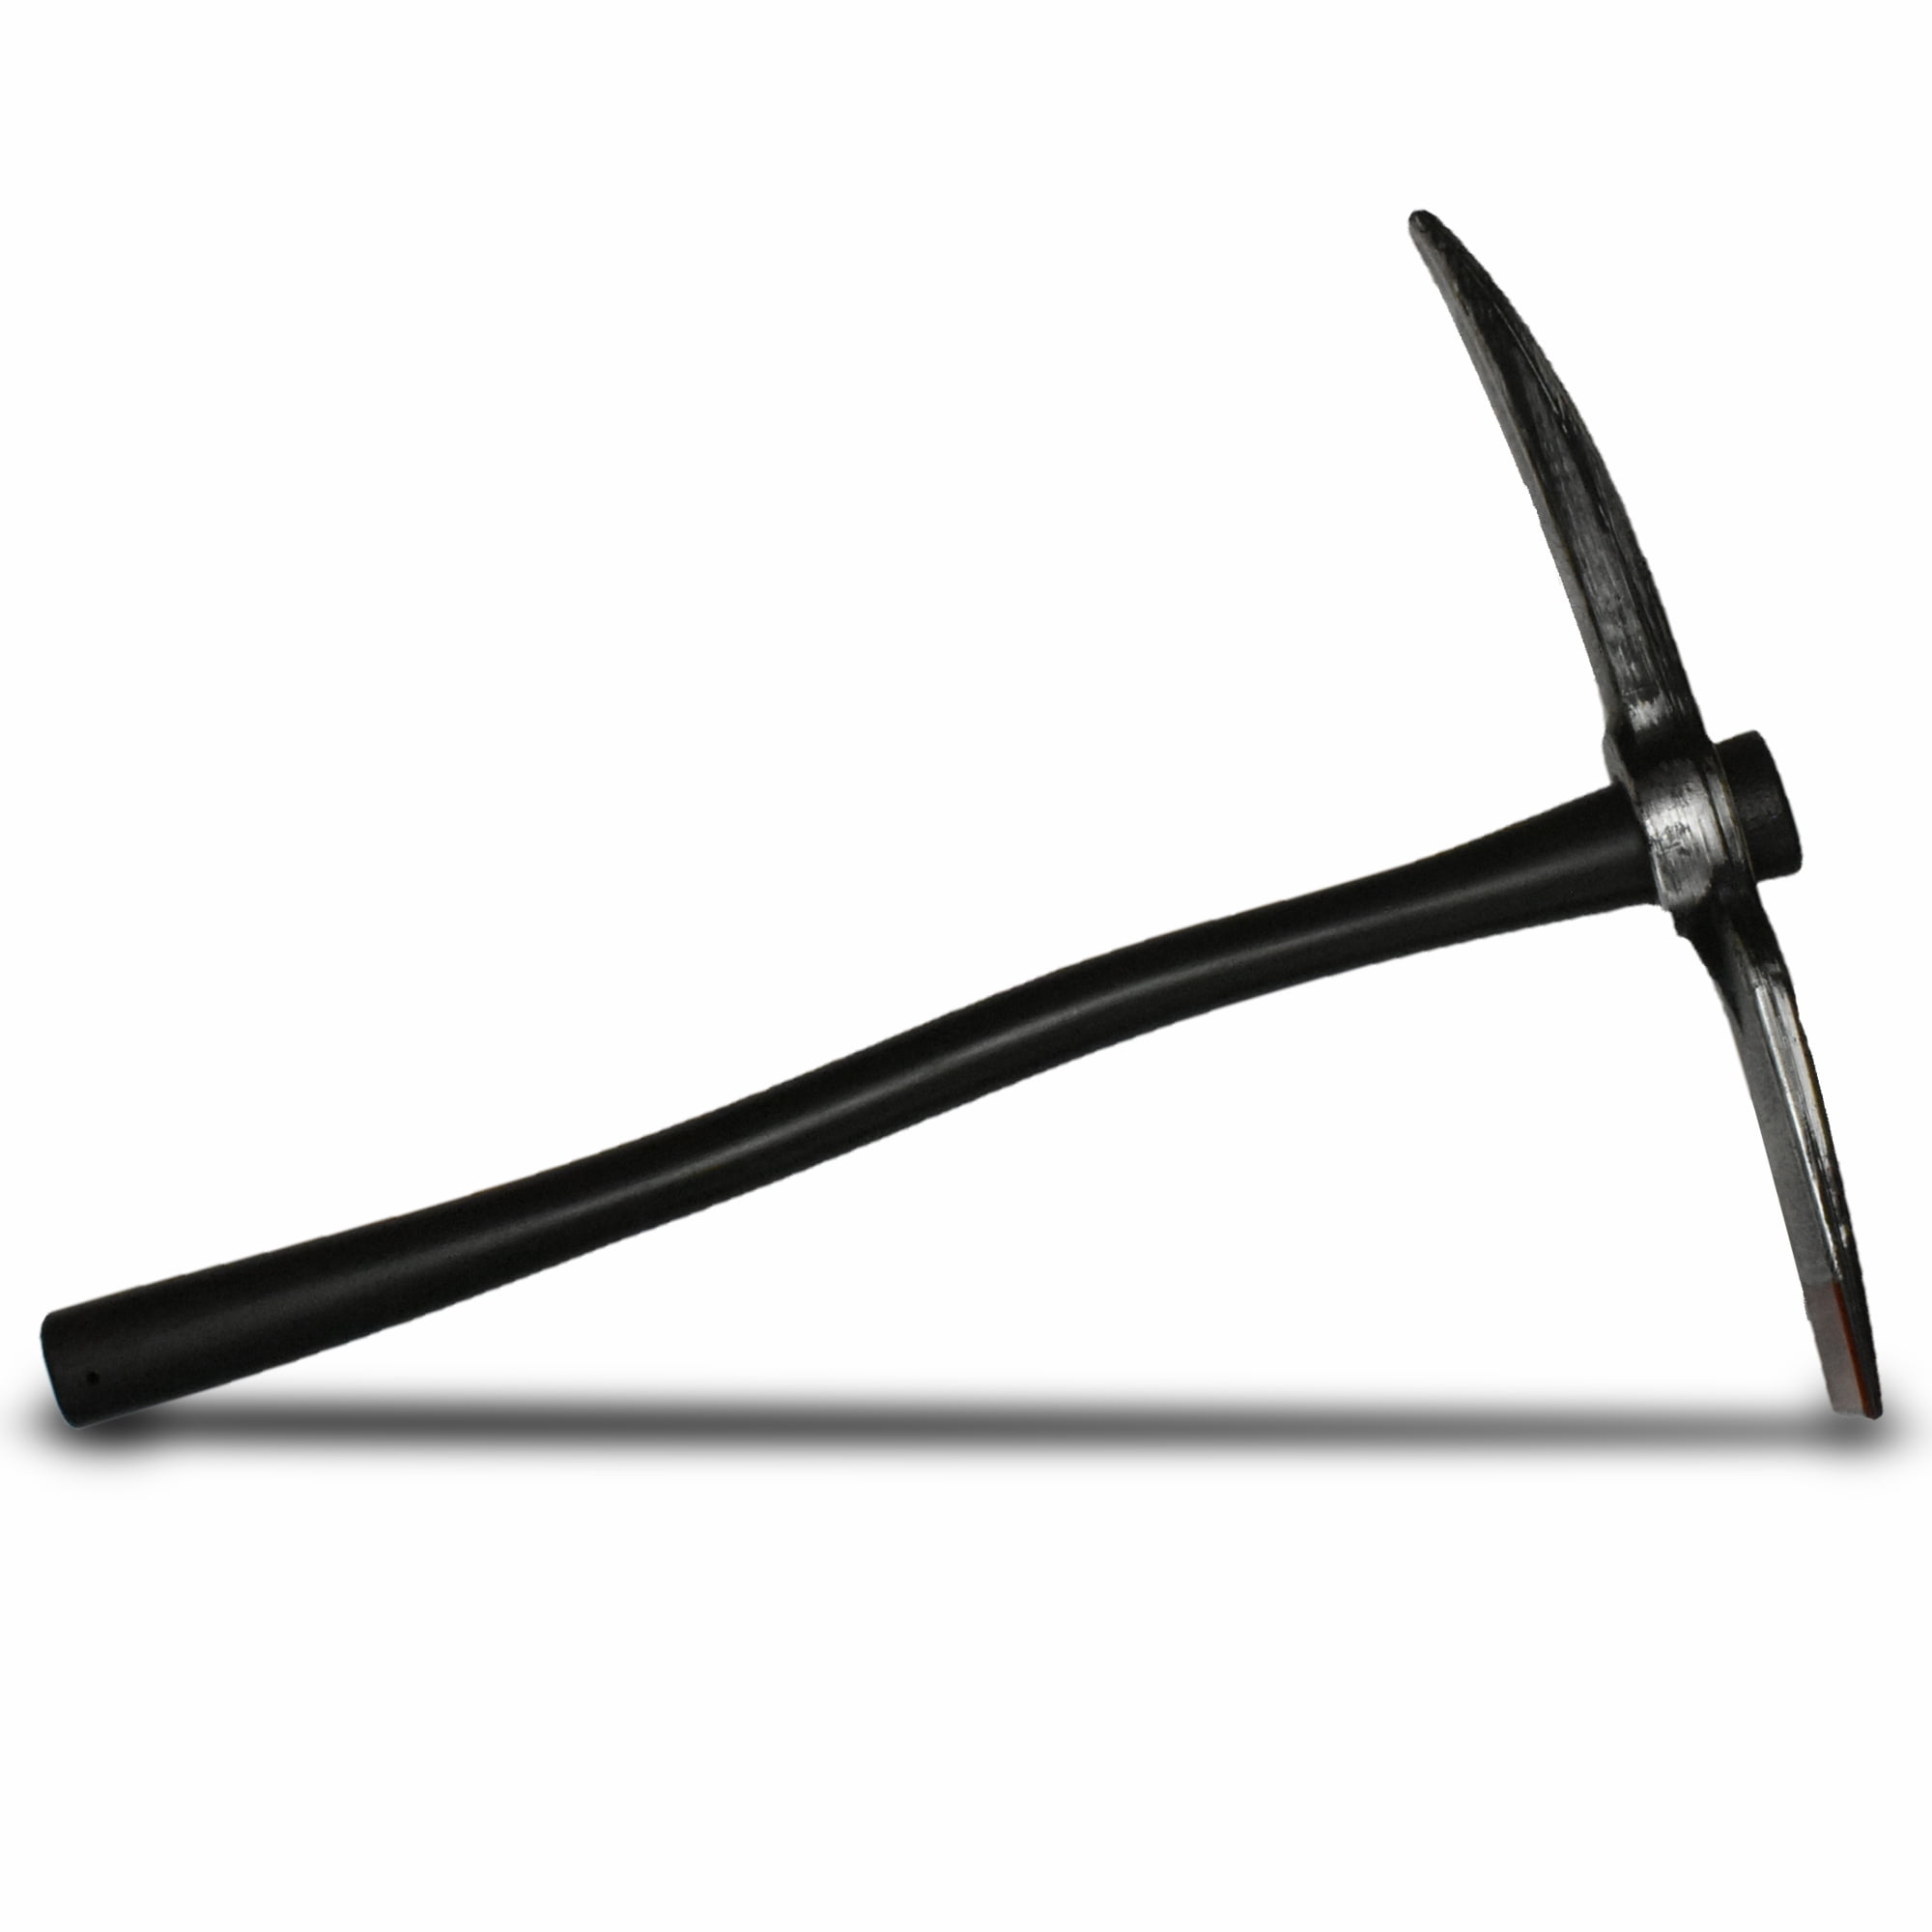 Way To Celebrate Halloween Male Kids Toy Pick Axe, Black Color